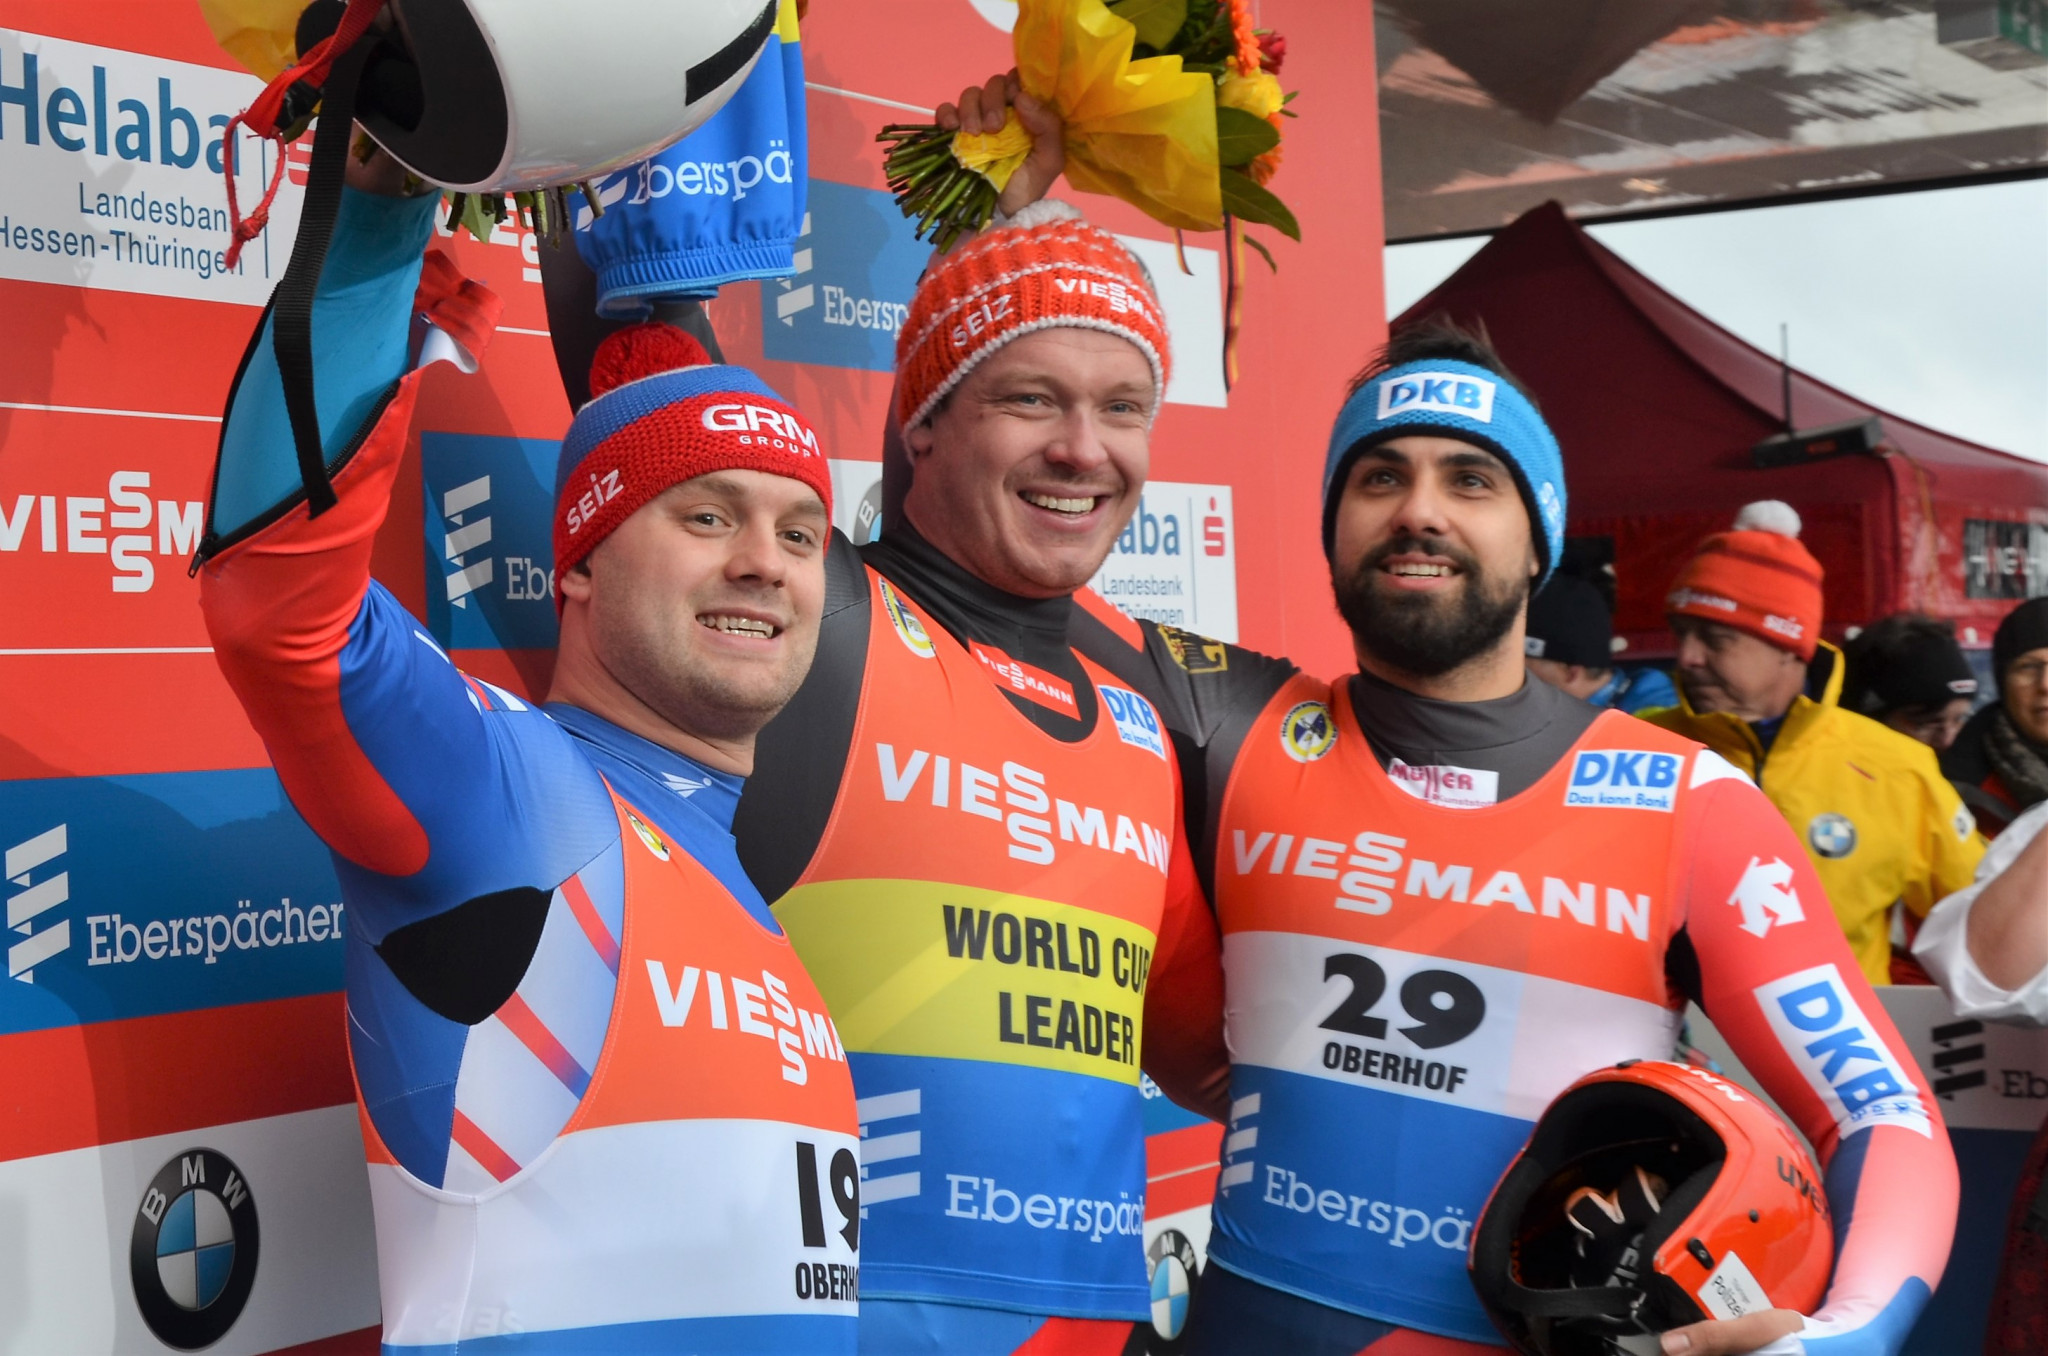 Germany's Felix Loch, centre, has increased his lead in the FIL World Cup standings after winning the men’s singles event in front of a home crowd in Oberhof today ©FIL